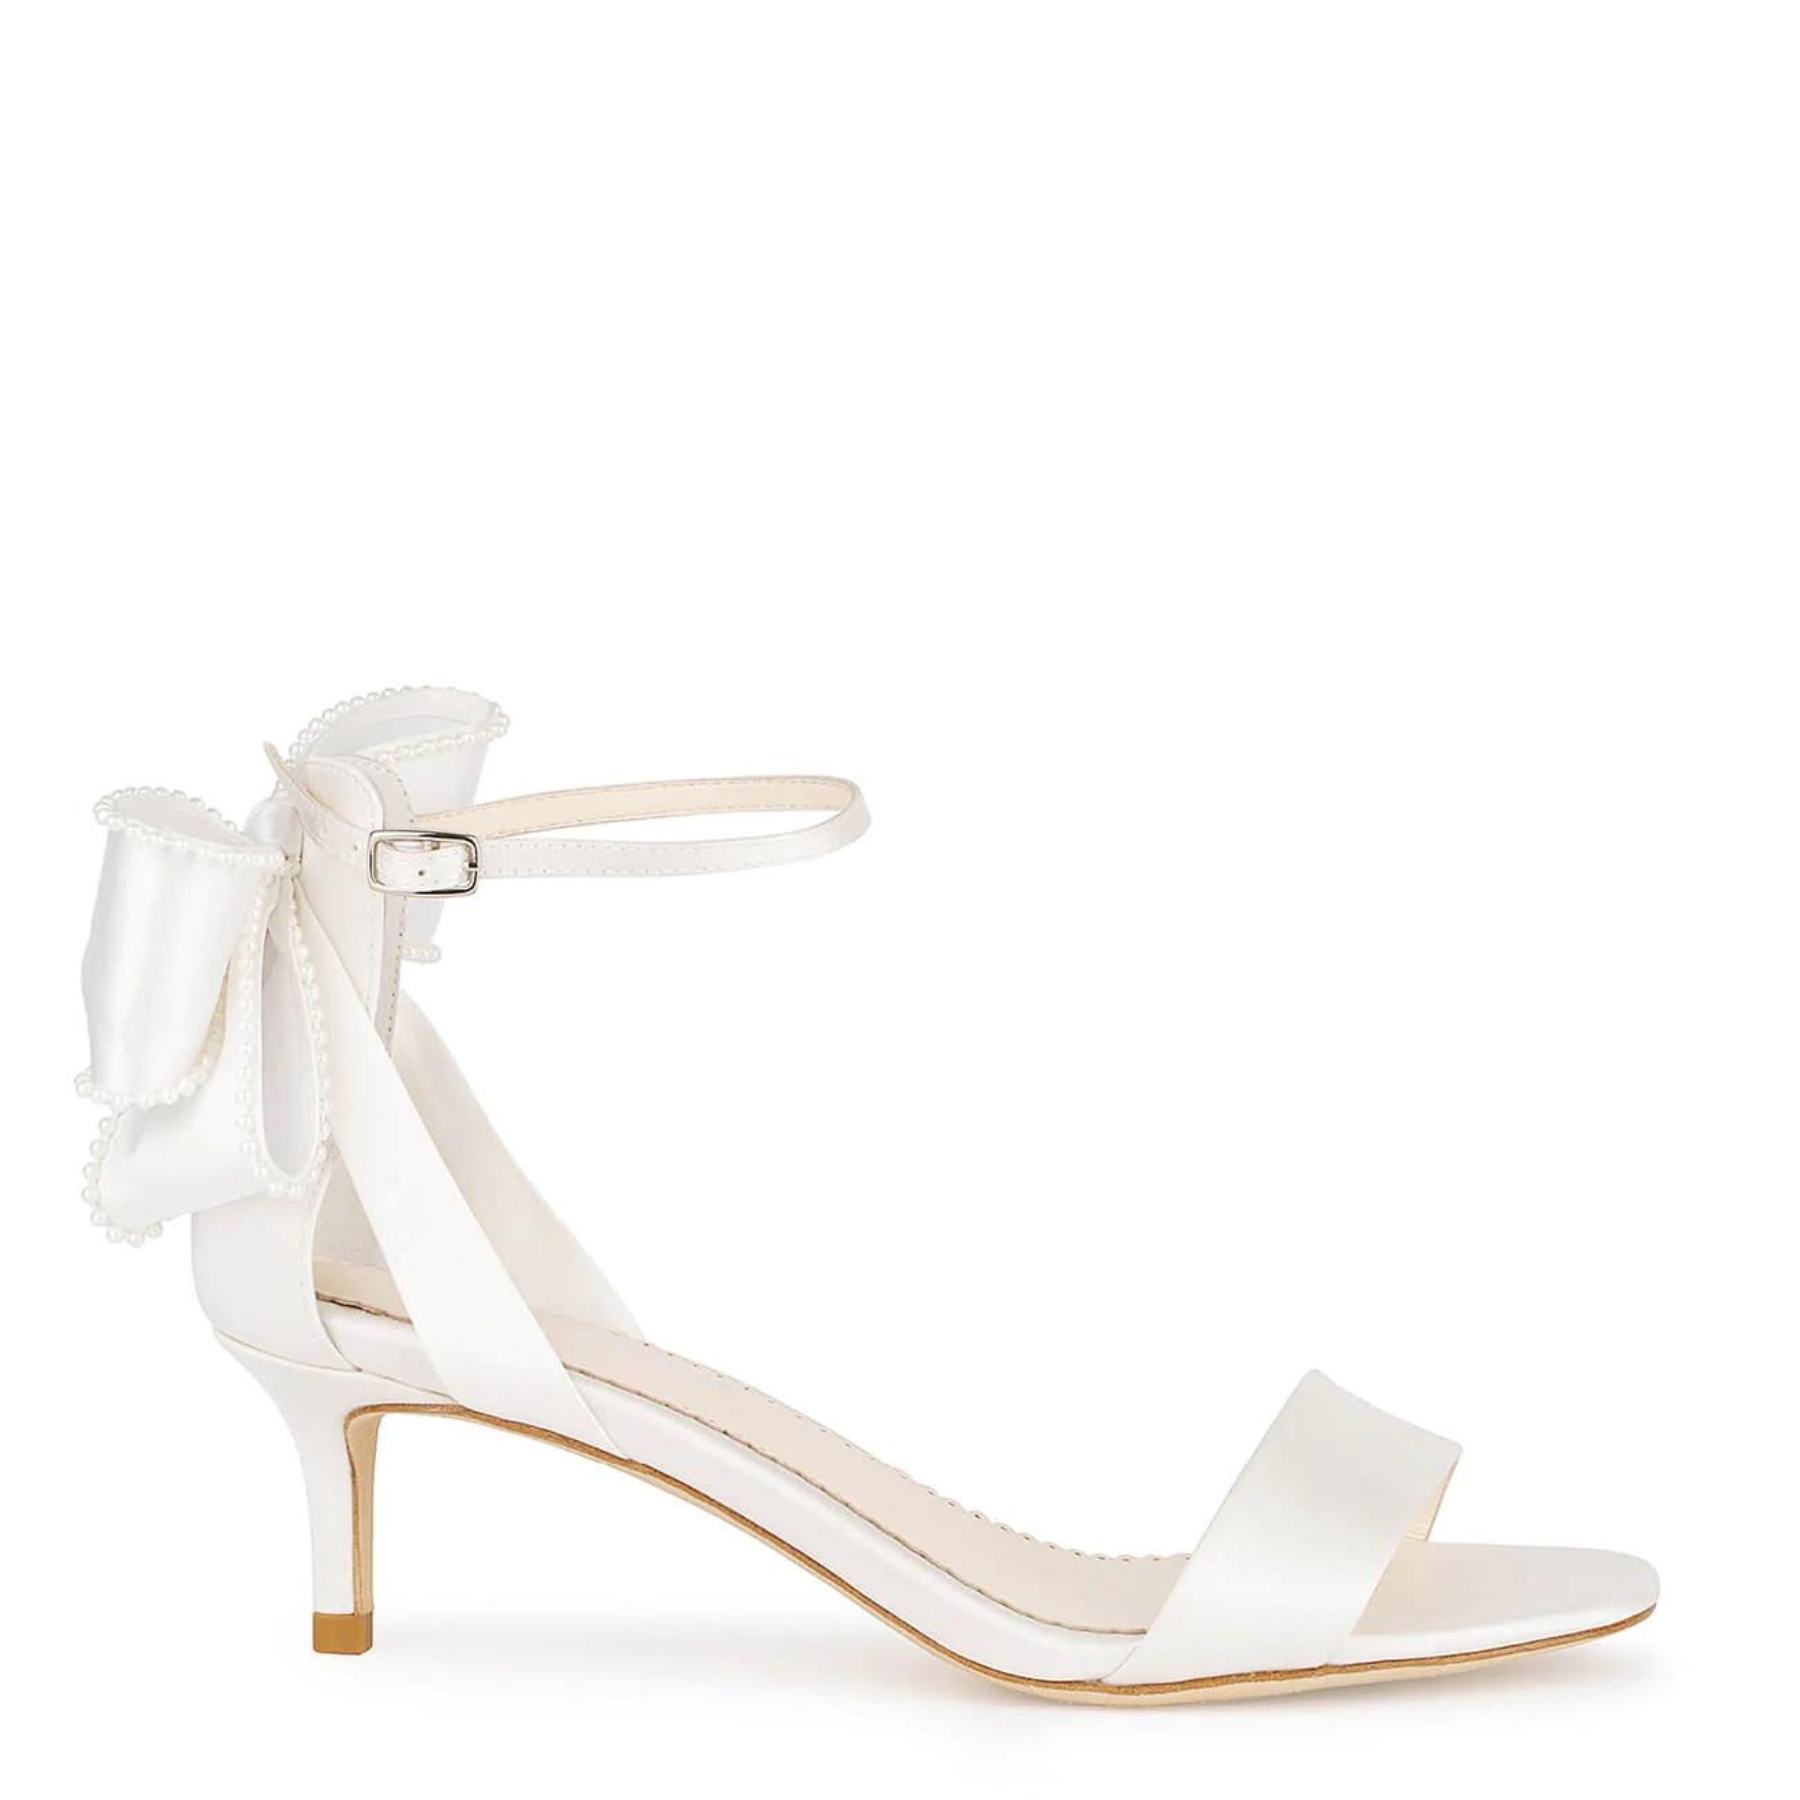 Mira - Ivory Pearl Open Toe Low Heel Sandals With Bow